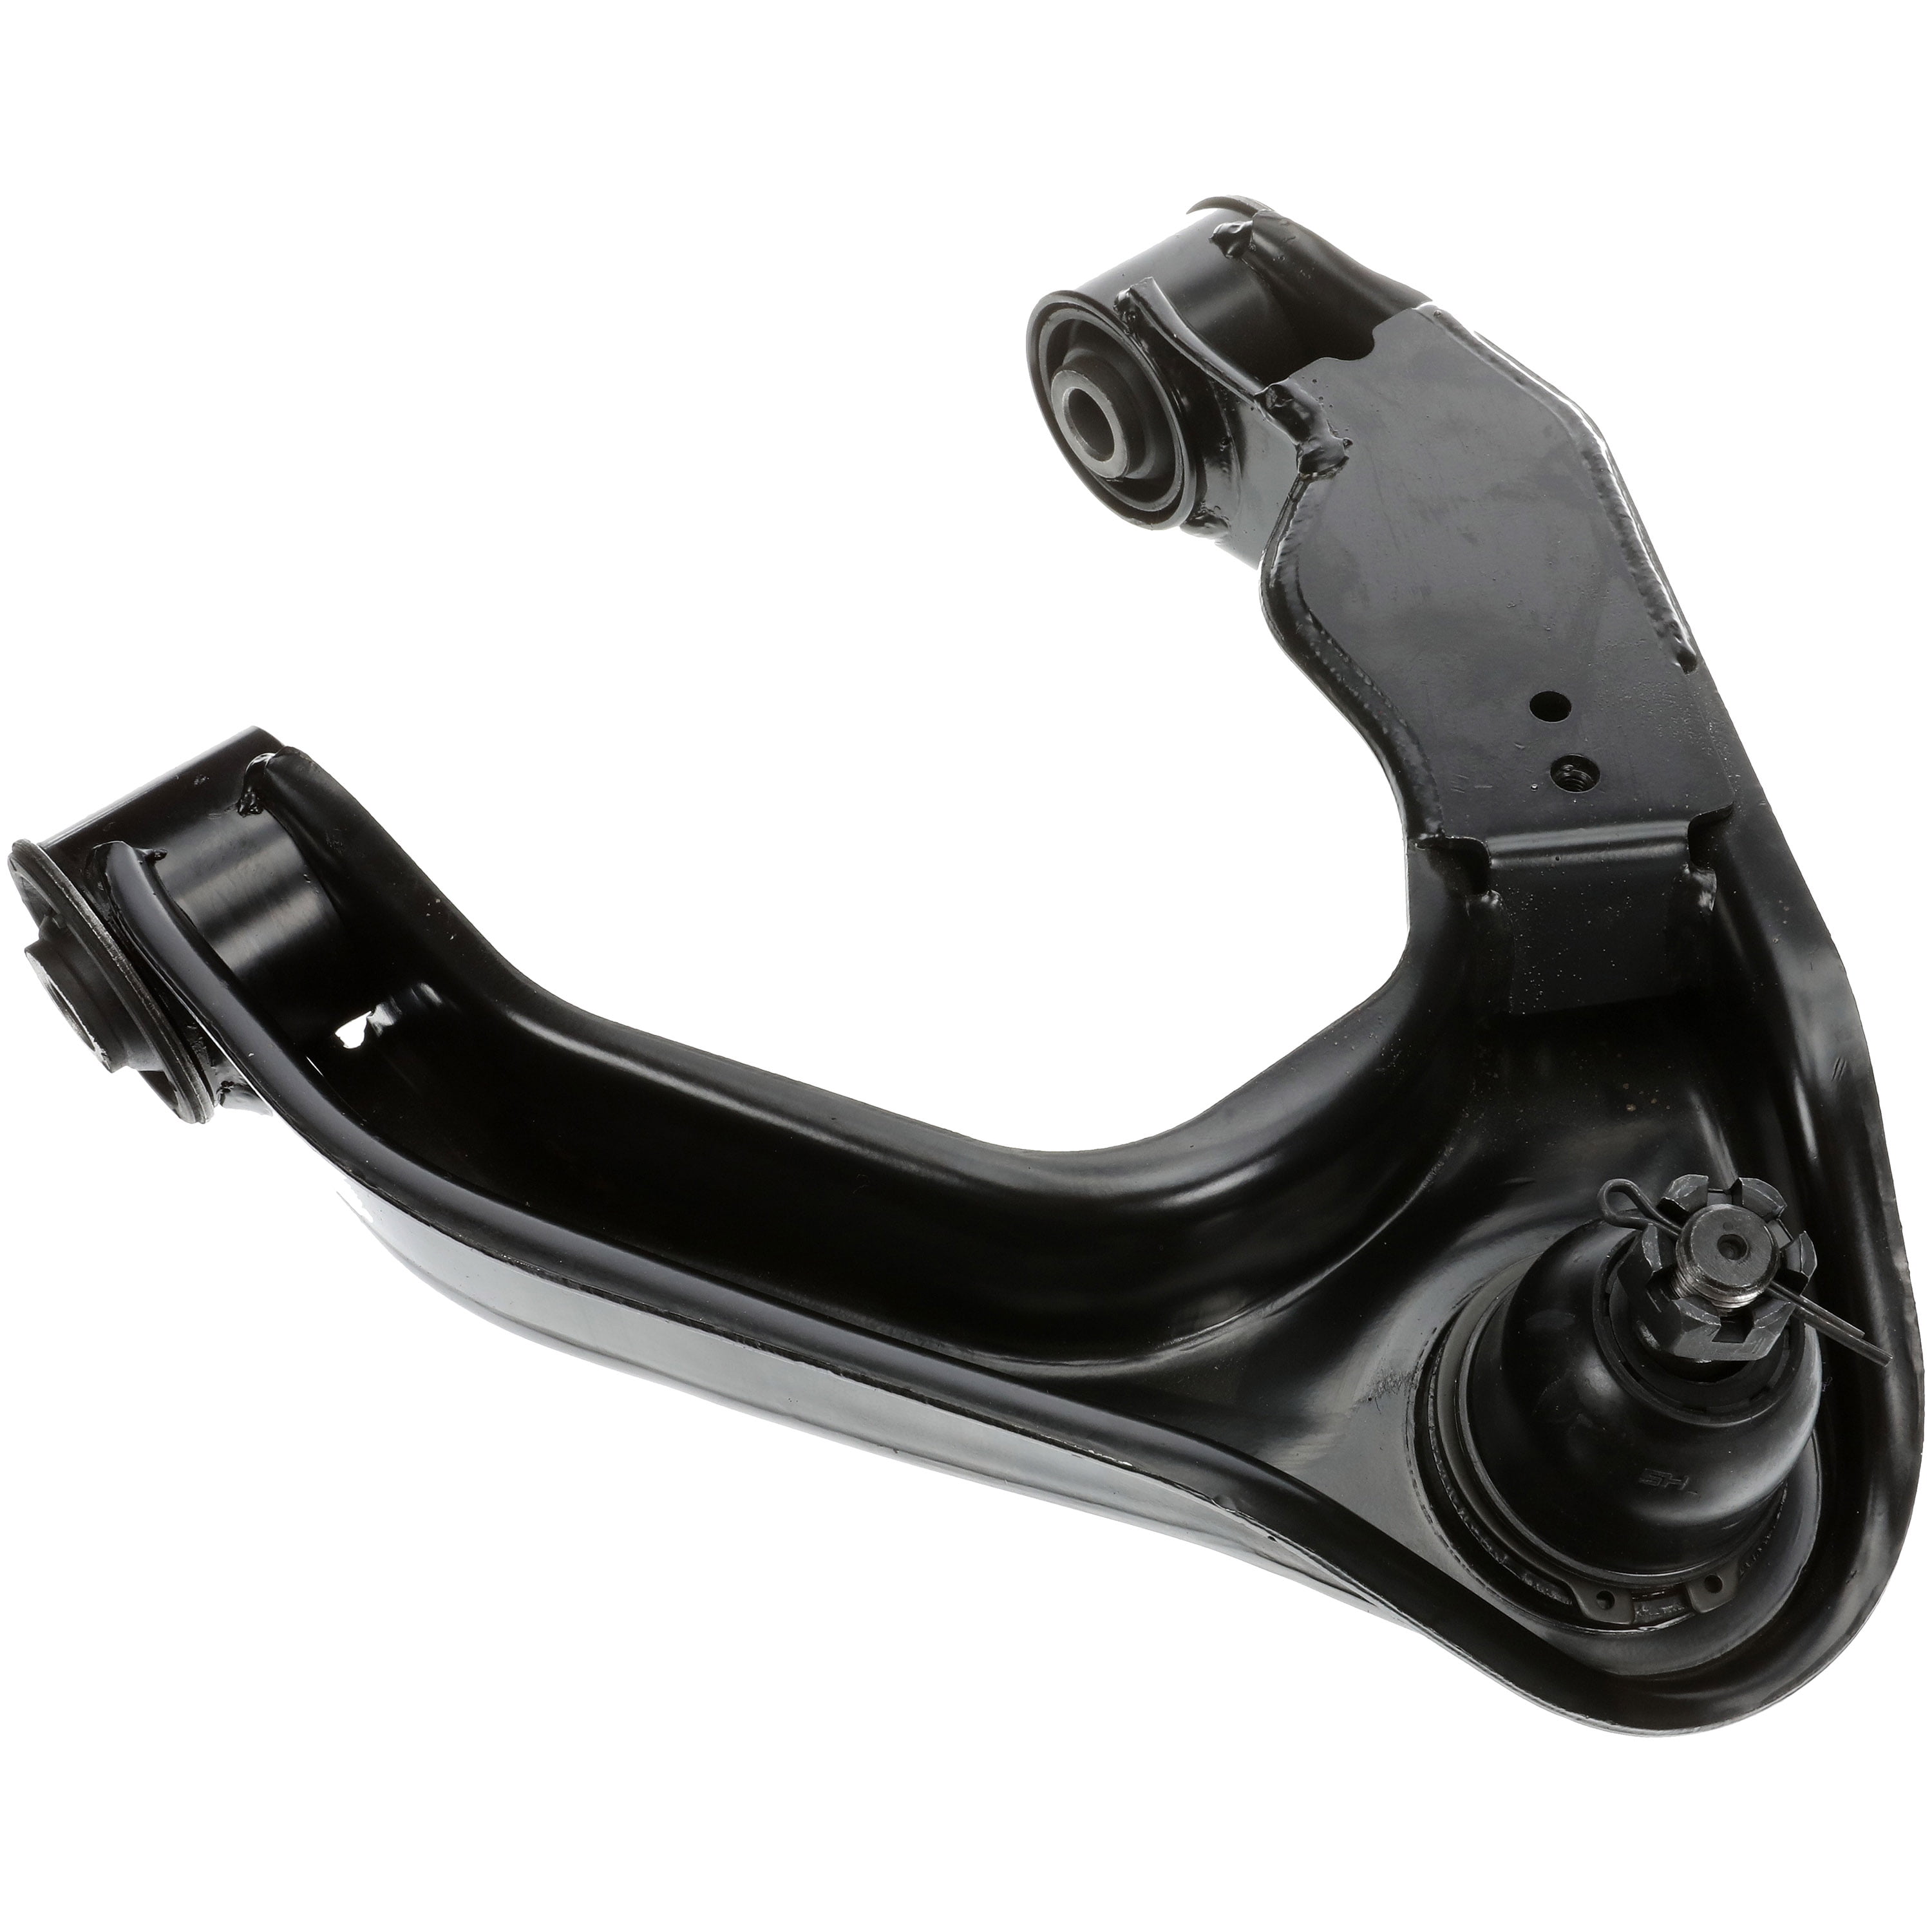 Dorman 521-153 Front Left Upper Suspension Control Arm and Ball Joint  Assembly for Specific Nissan Models Fits select: 2000-2004 NISSAN XTERRA, 